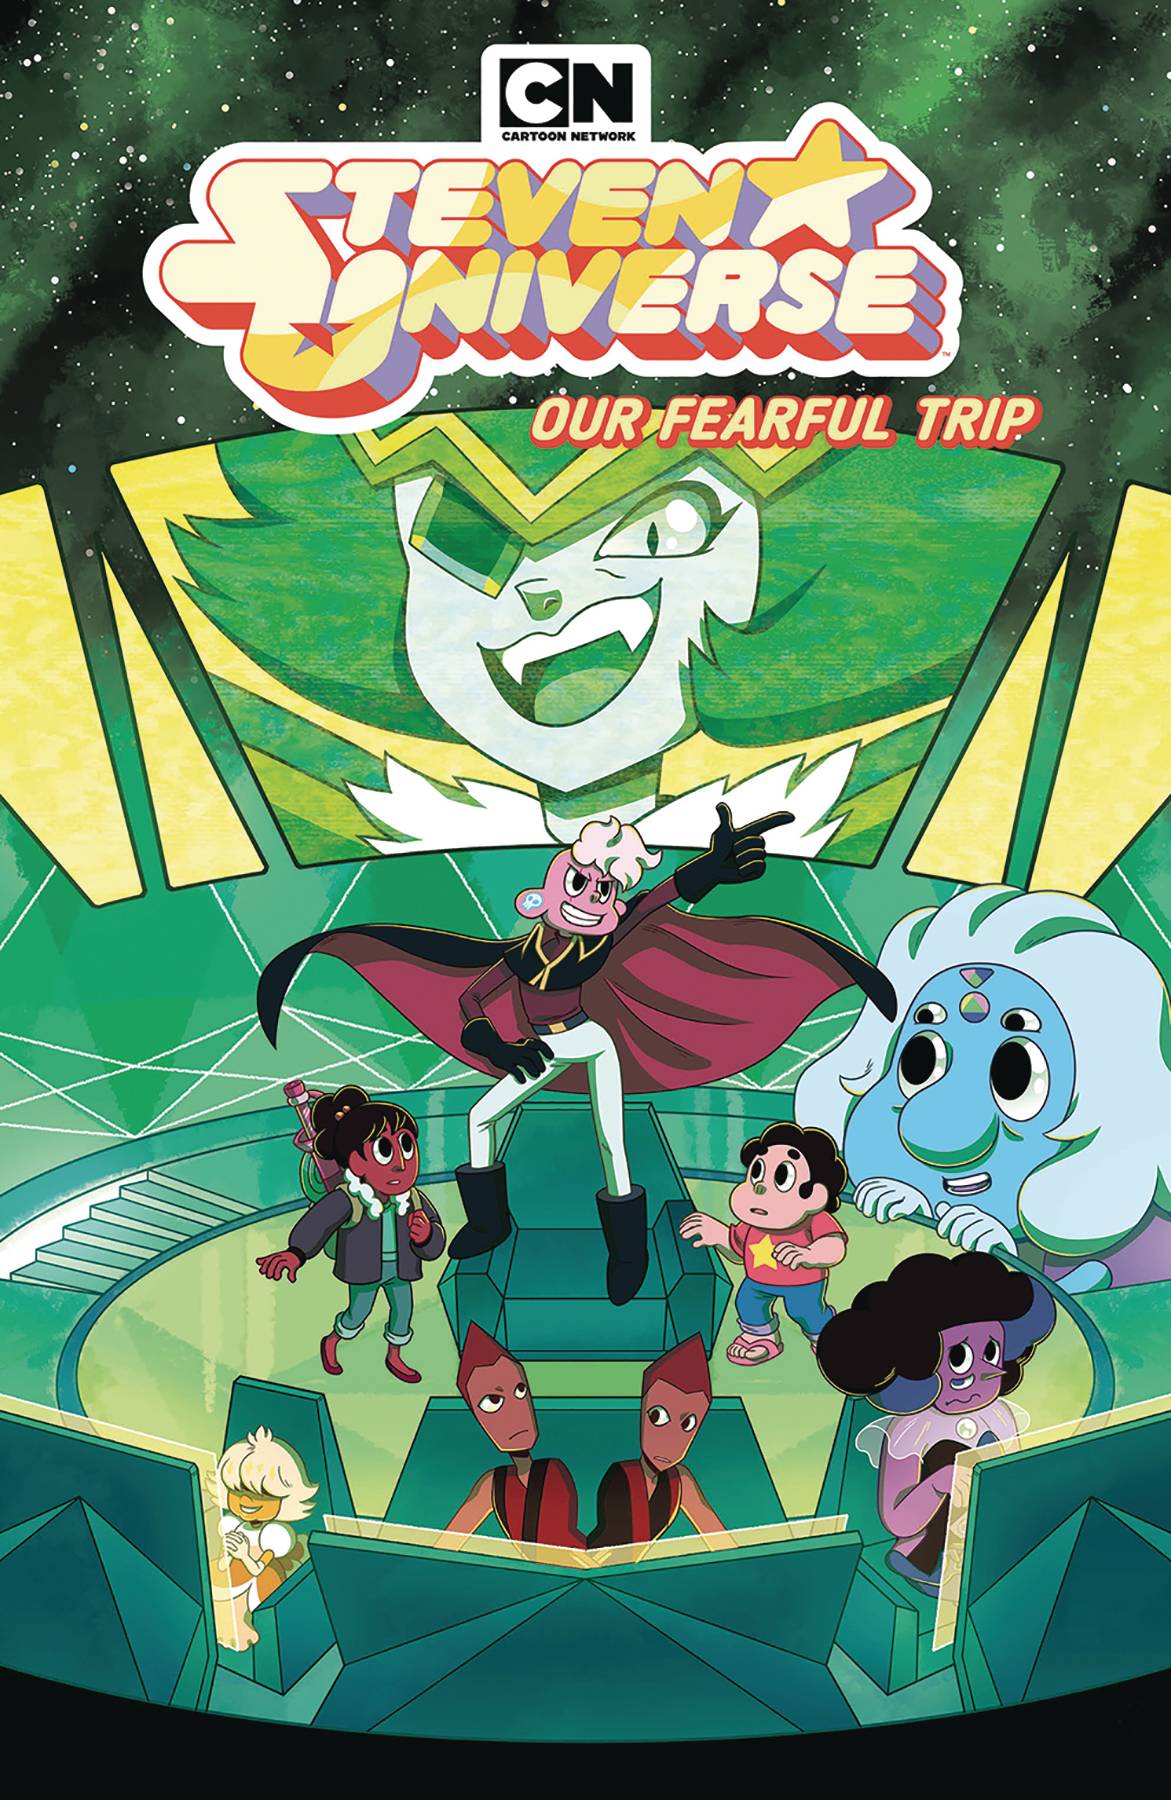 Steven Universe Ongoing  Vol 07 Our Fearful Trip